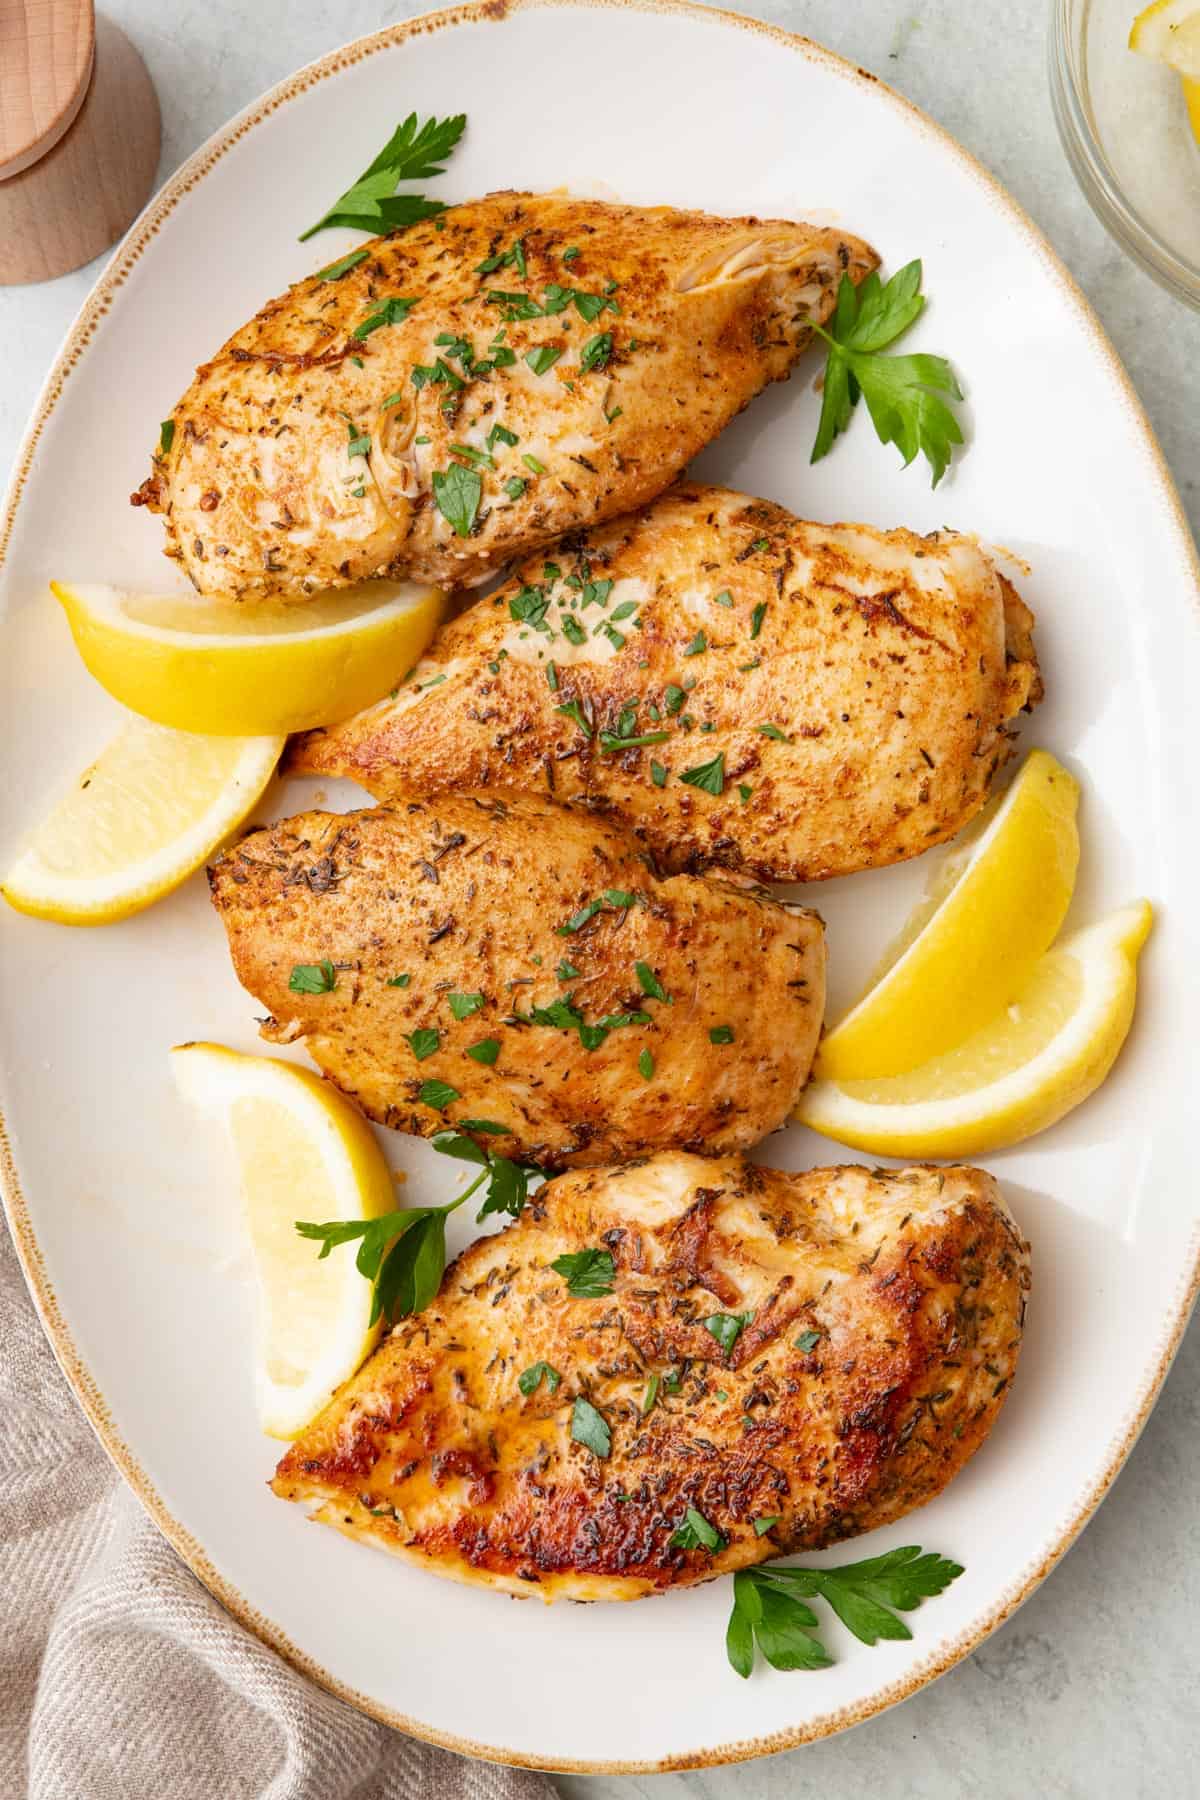 Pan seared chicken breast on a large oval platter, garnished with fresh parsley and lemon wedges.